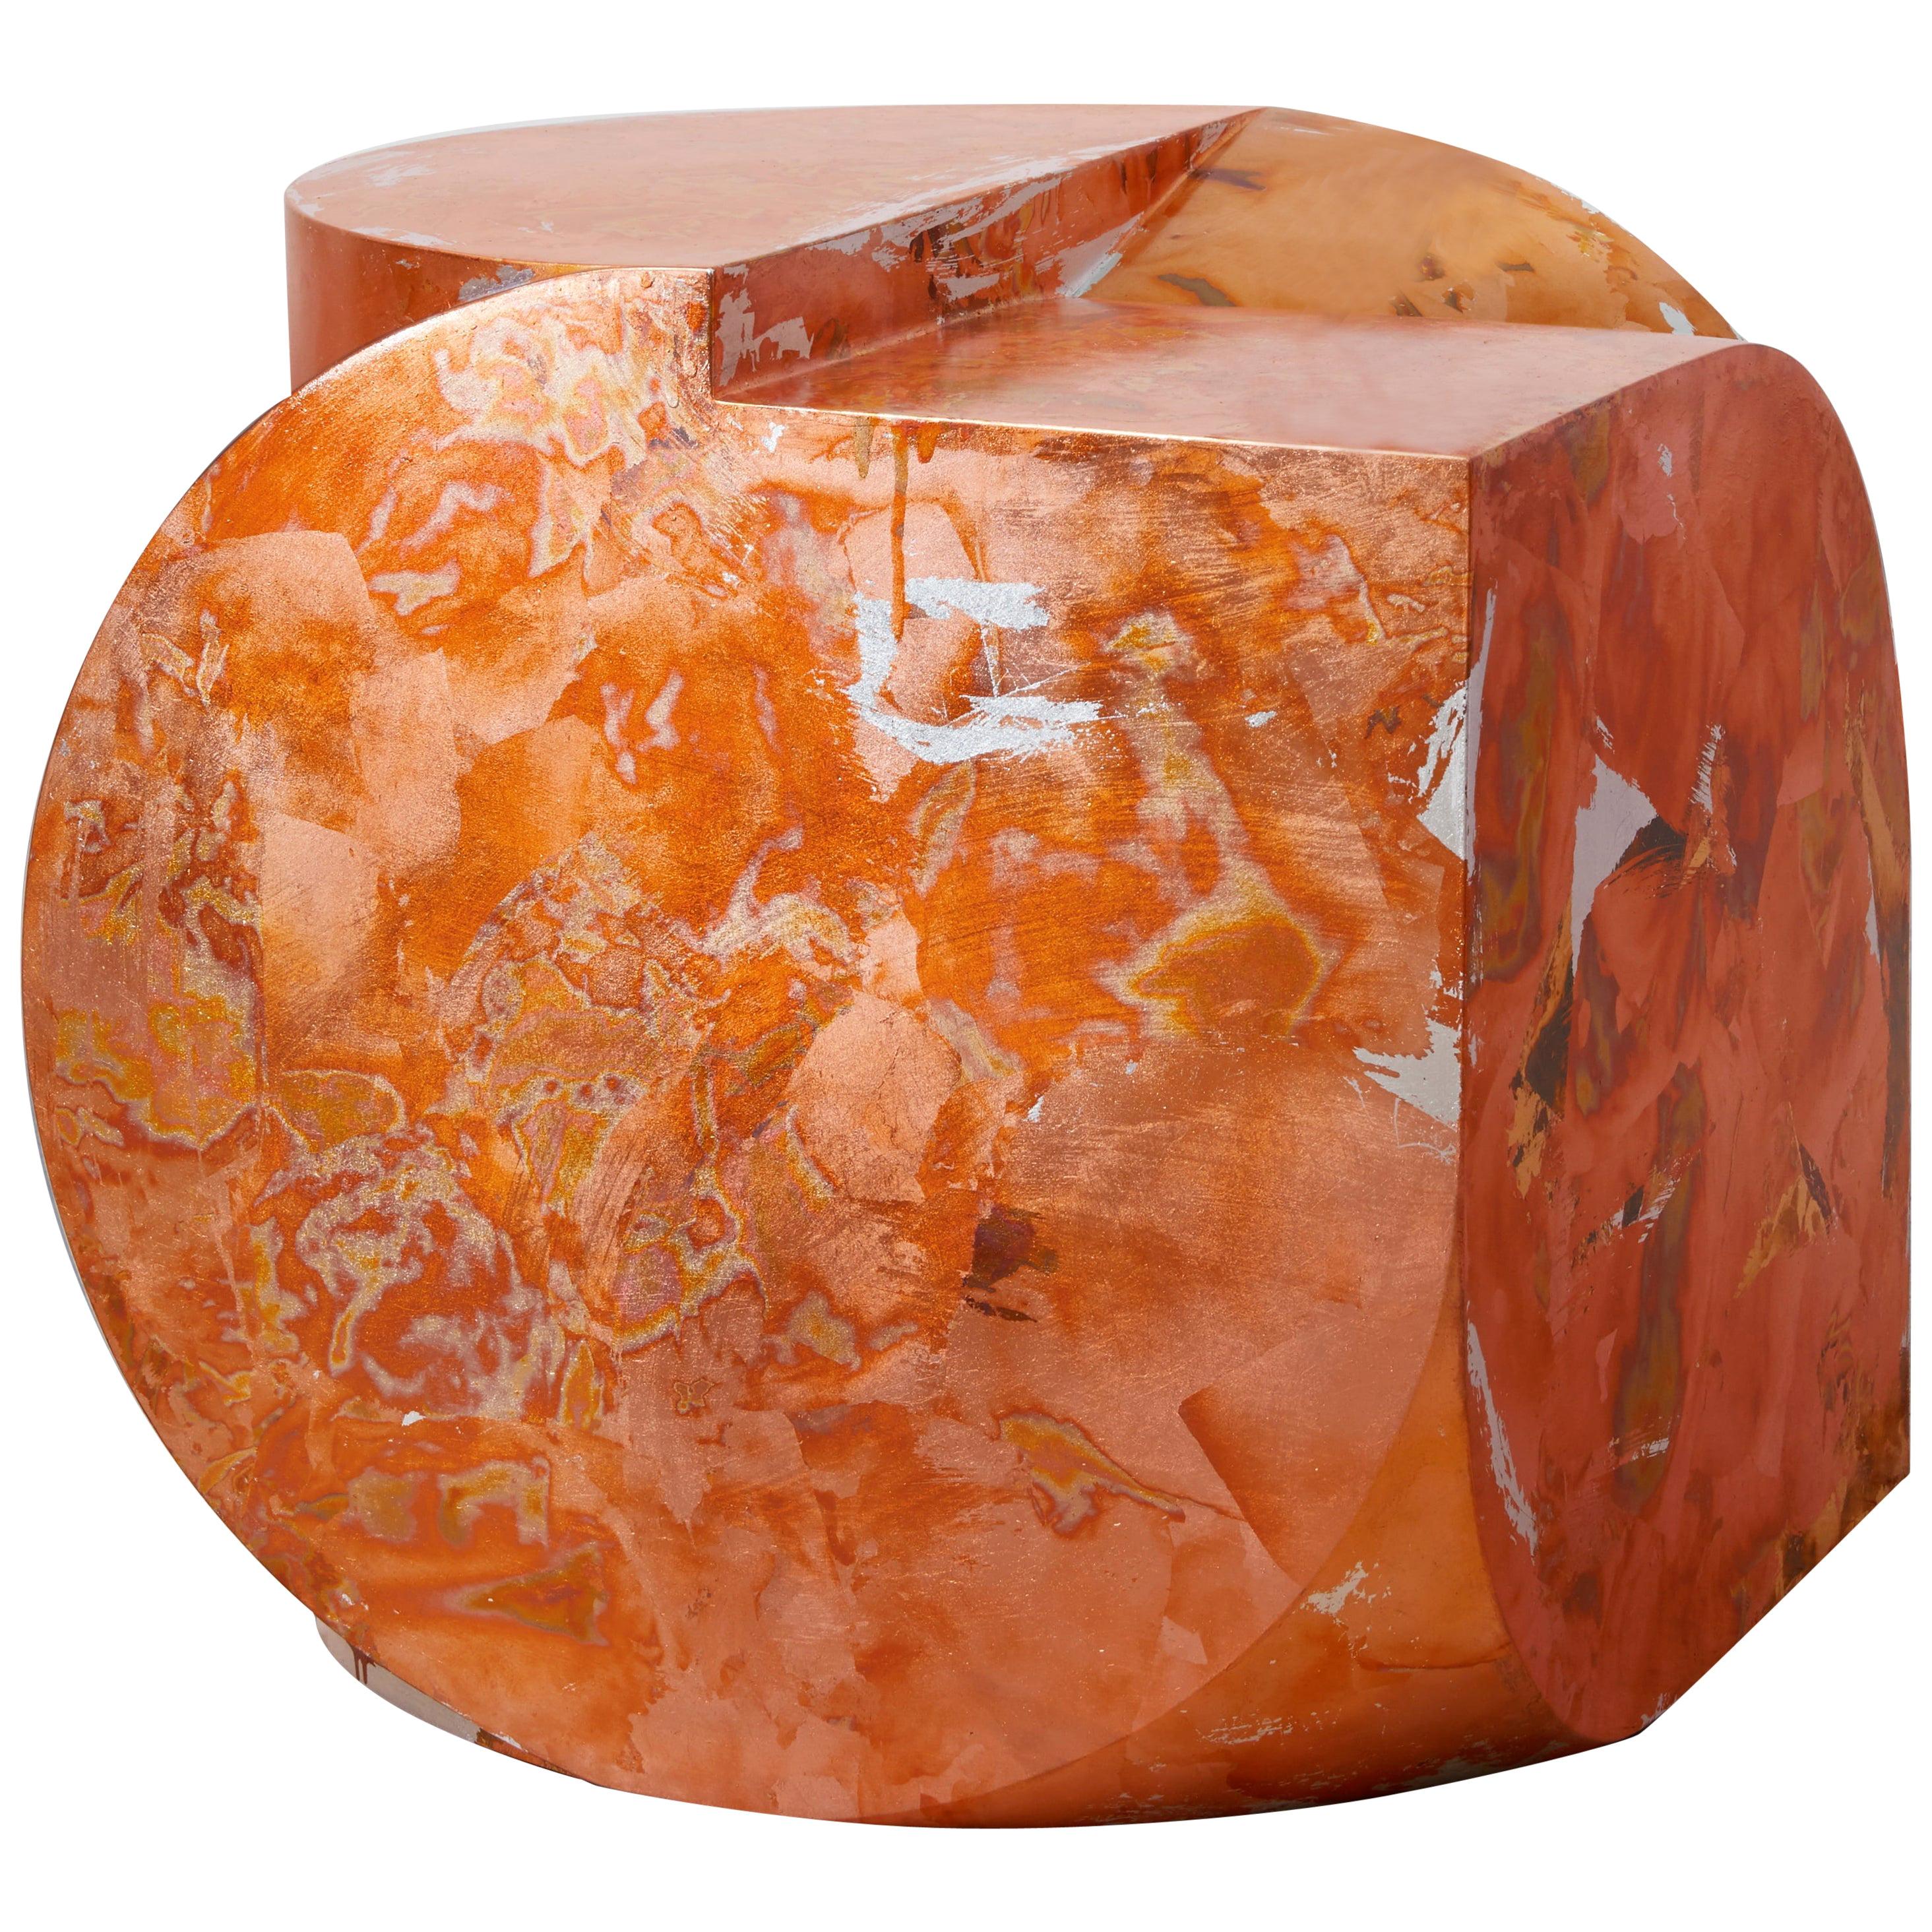 Daishi Luo, Copper Side Table or Stool, 'Monocrystal' For Sale